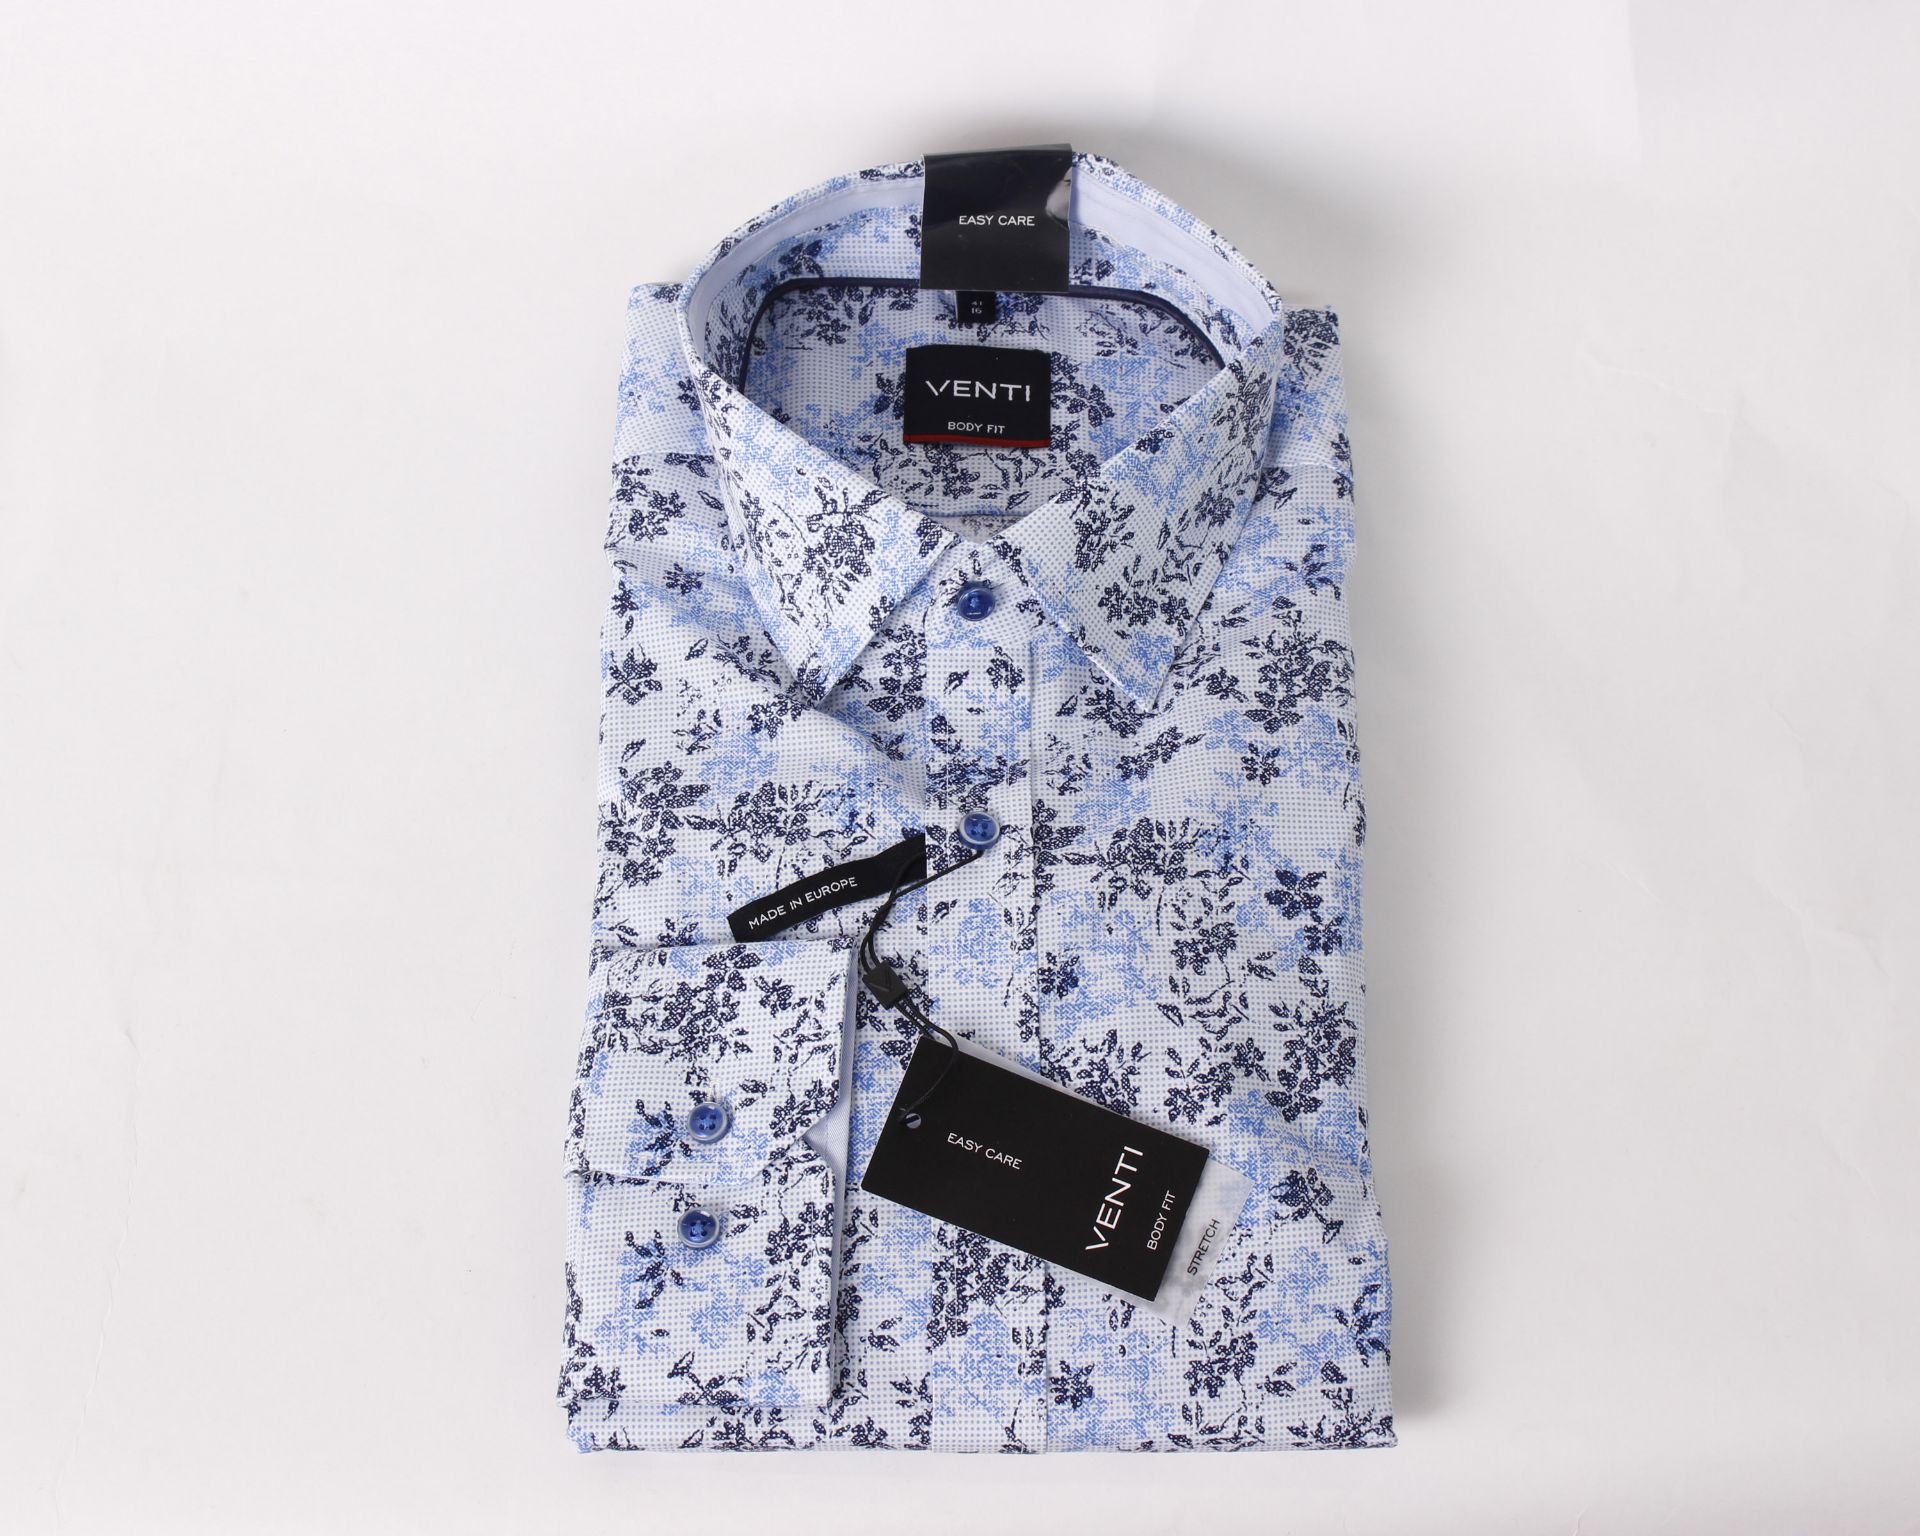 Three men's as new Venti body fit shirts in a blue floral design (39, 41 and 42).